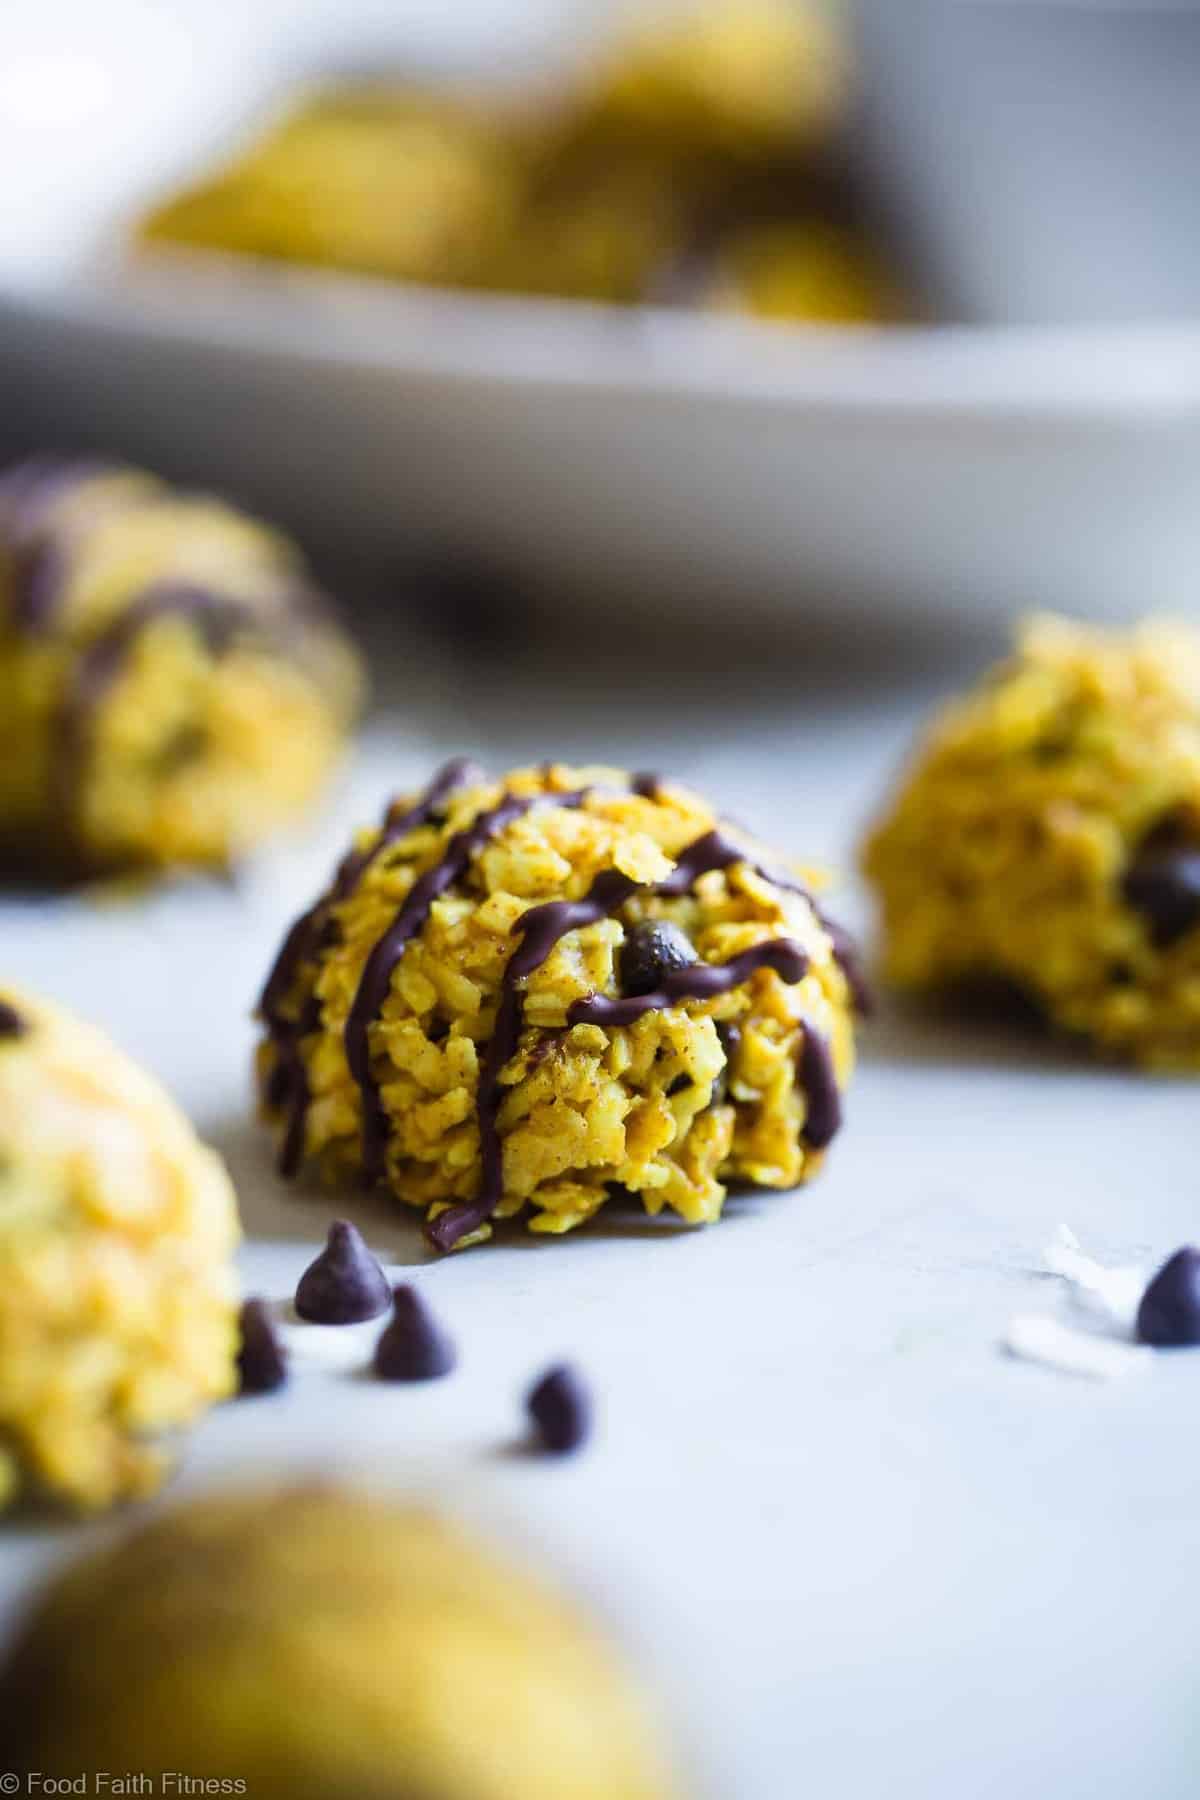 No Bake Turmeric Almond Coconut Macaroons -  These easy, 6 ingredient cookies have addicting spicy-sweet flavors from turmeric, almond butter and chocolate chips! They're a paleo, vegan and gluten free treat that is secretly anti-inflammatory! | #Foodfaithfitness | #Paleo #Vegan #Glutenfree #Dairyfree #Healthy